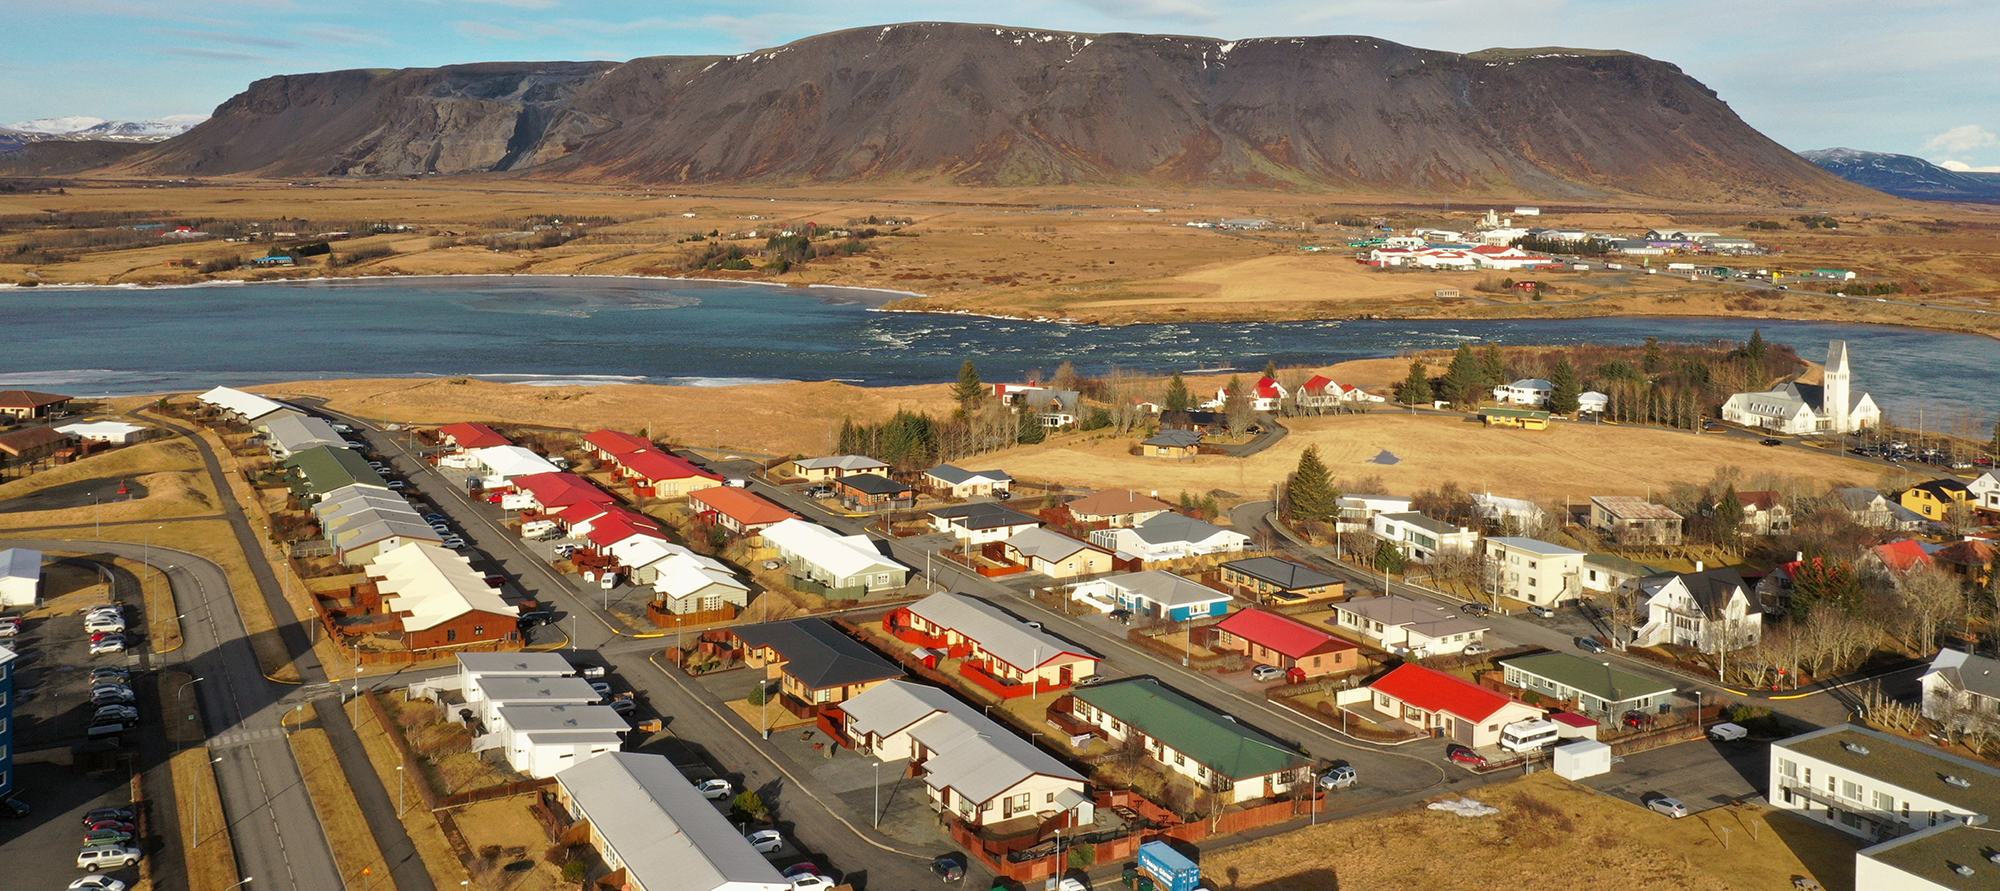 Hotels & Accommodation in Selfoss